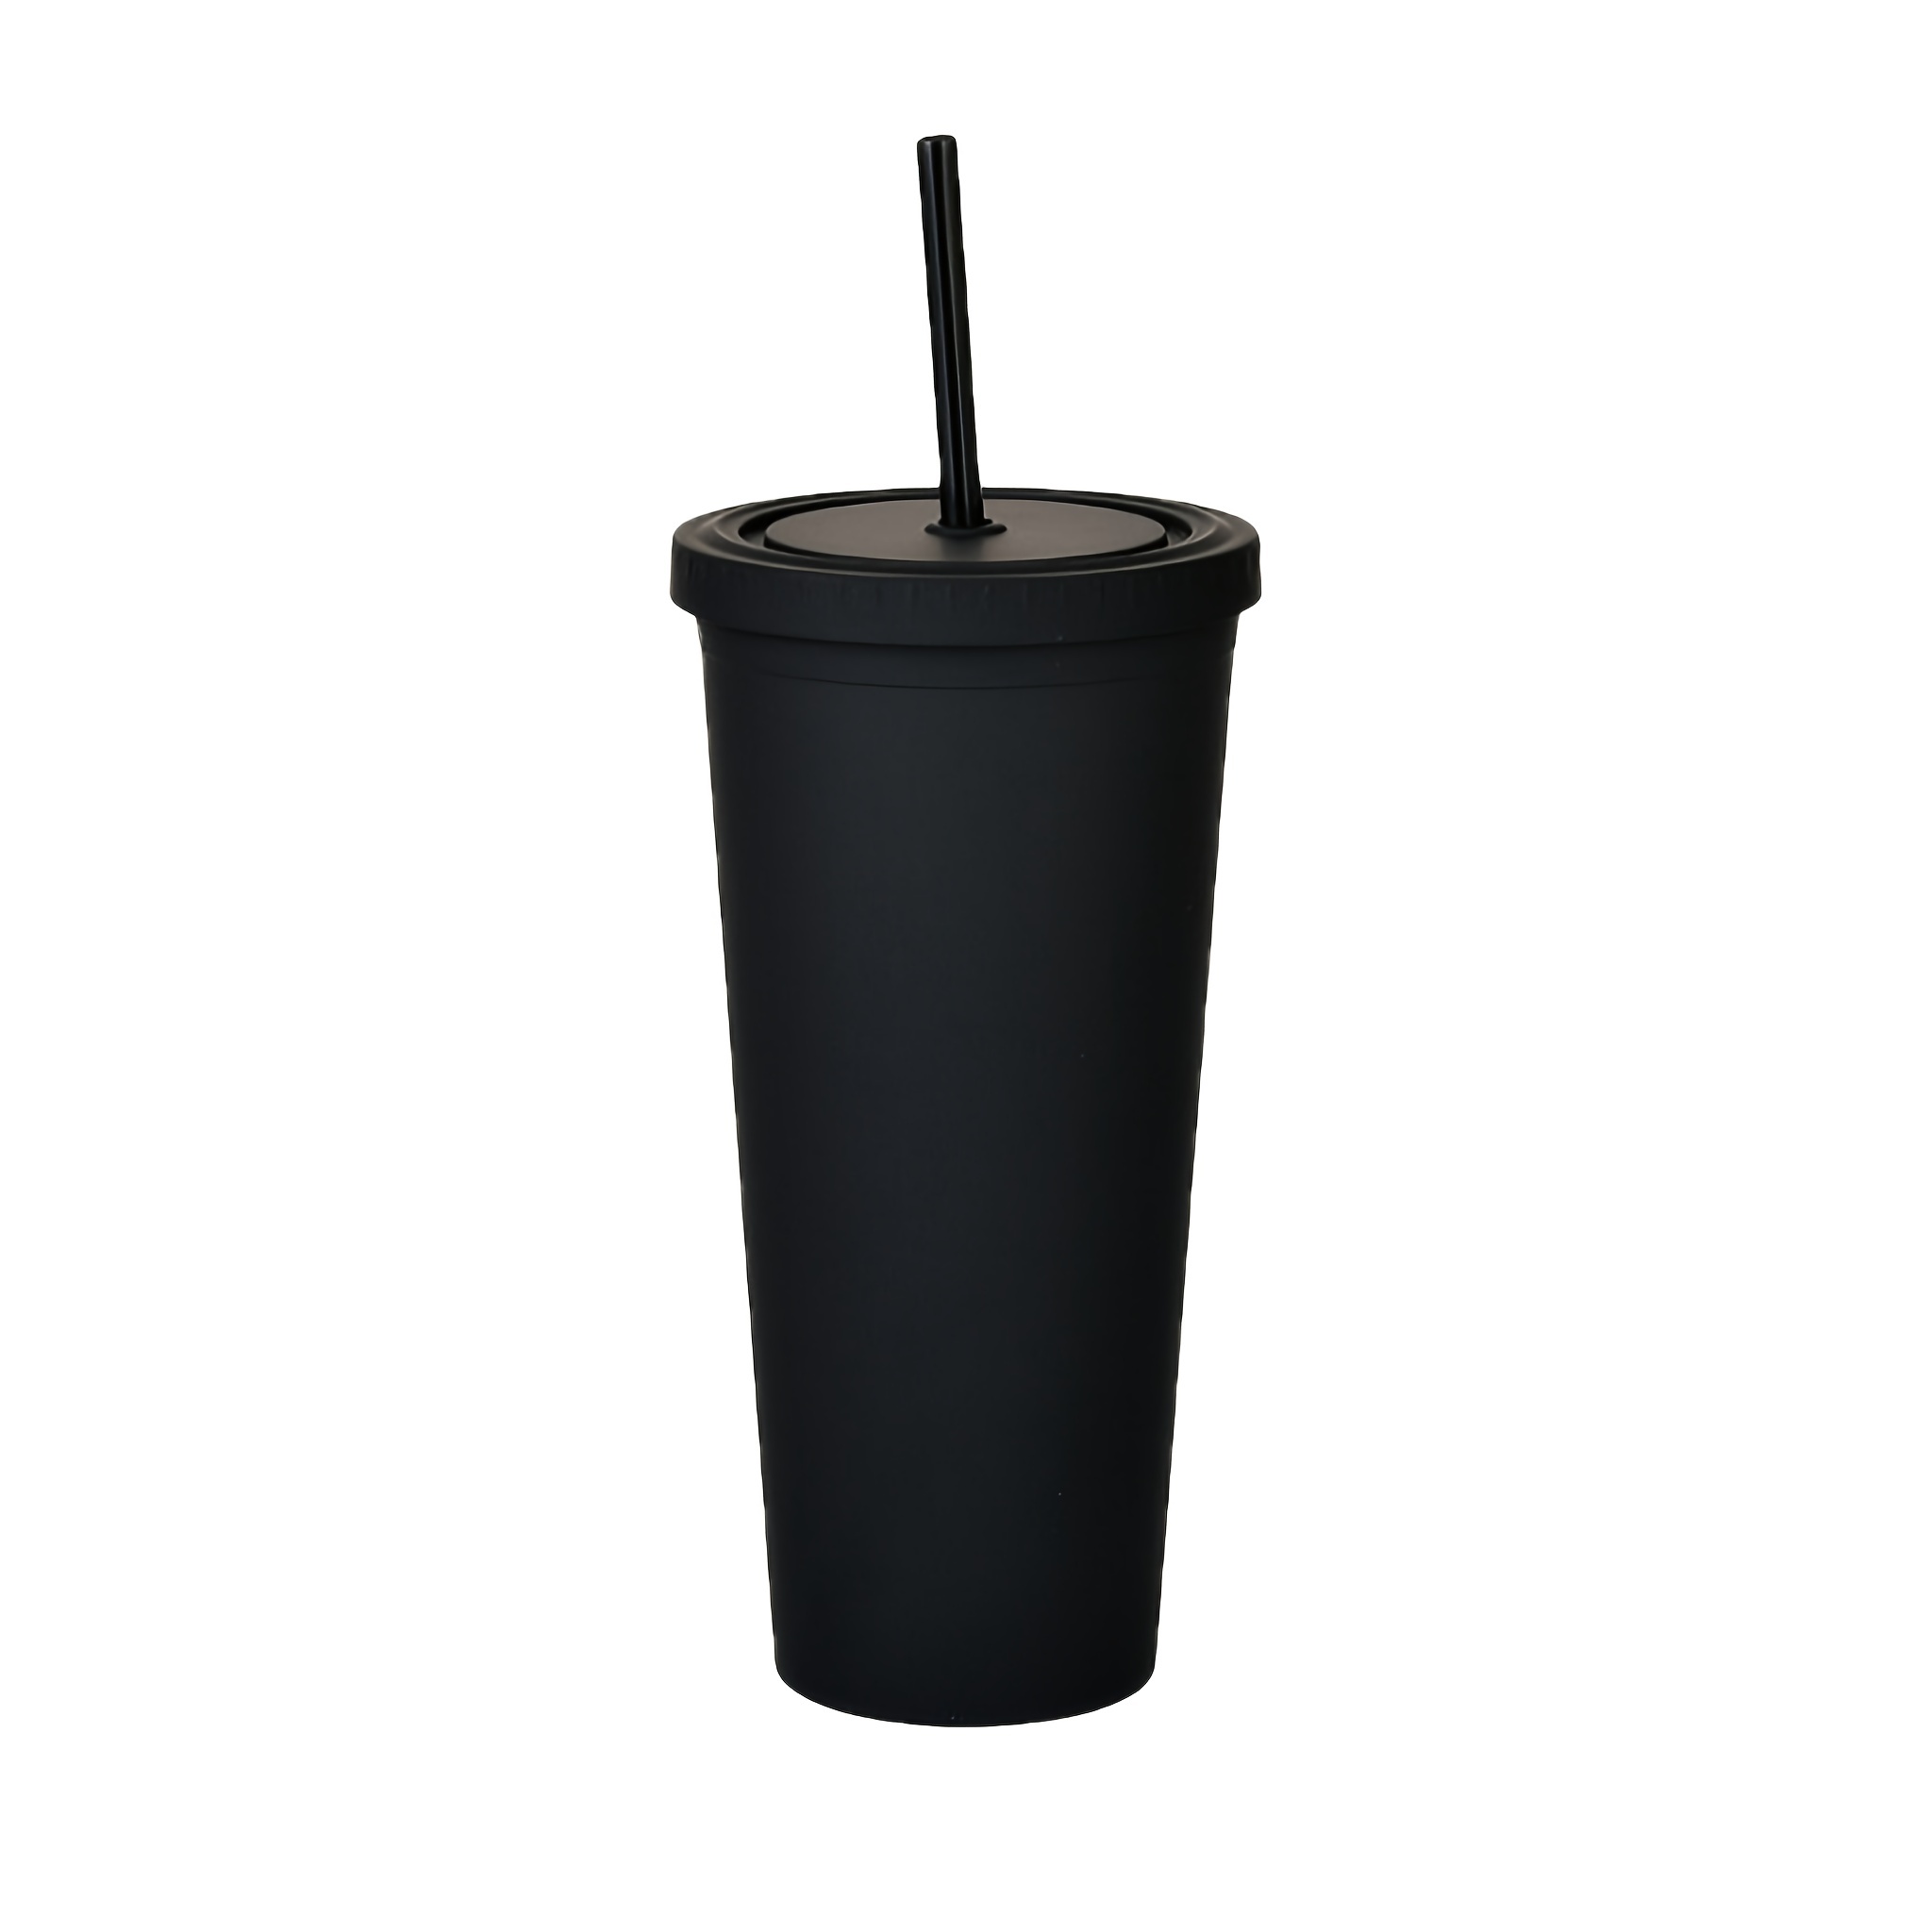 Plastic-free insulated glass coffee mug suitable for coffee or smoothie